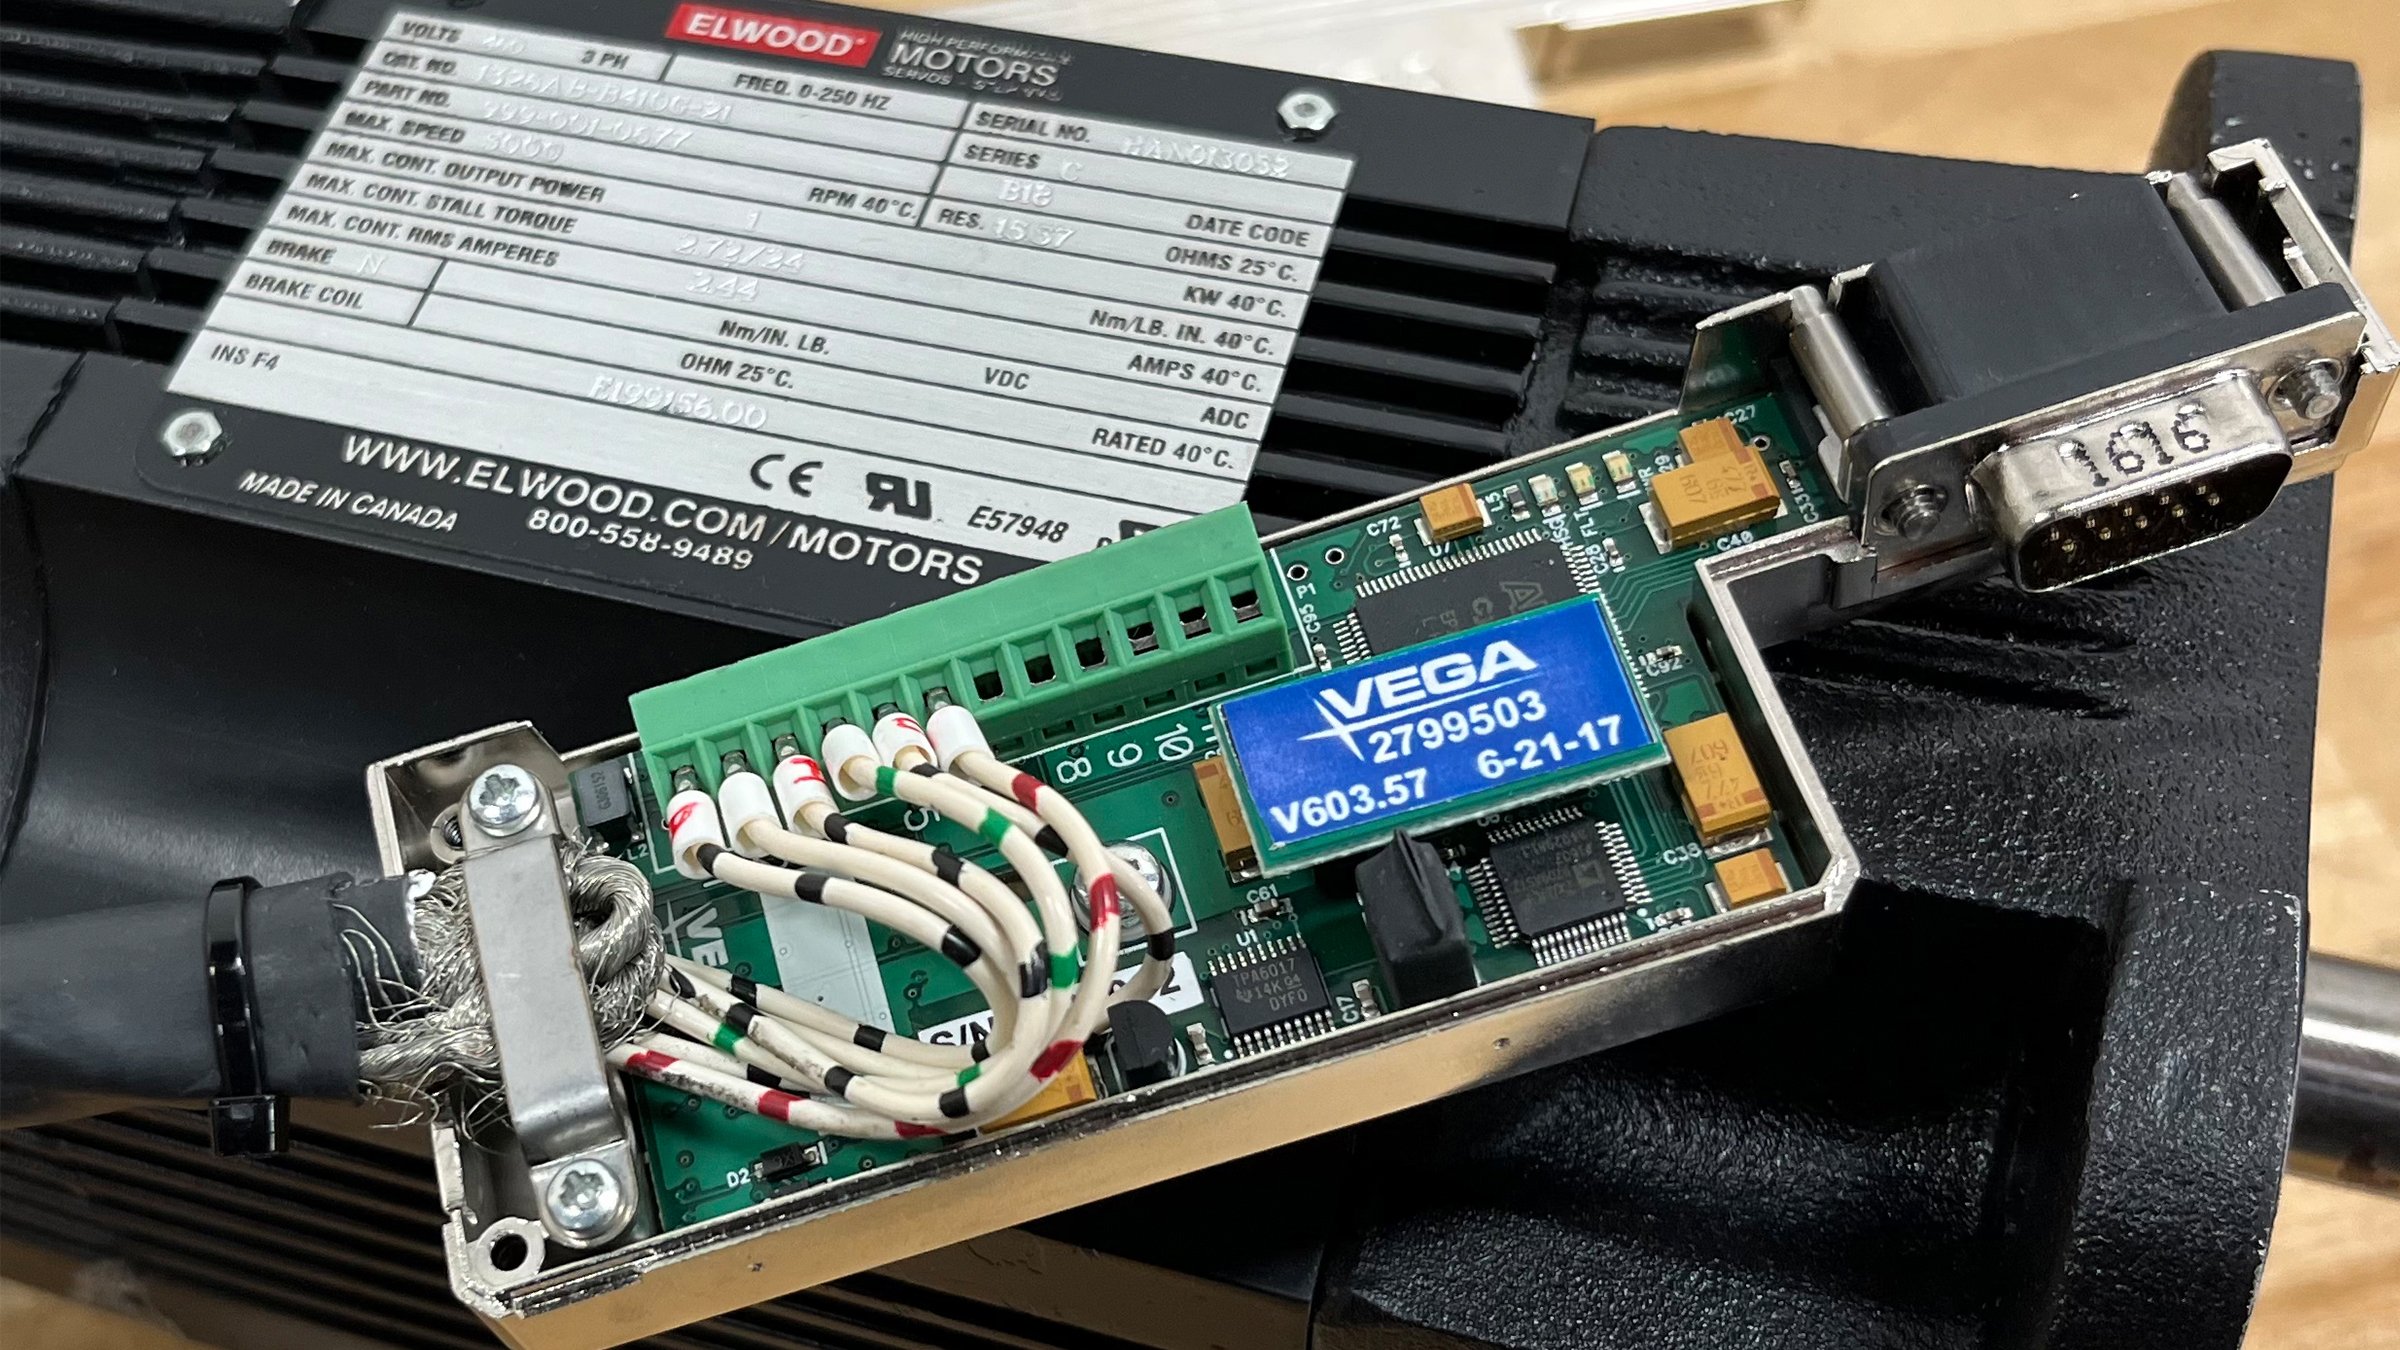 Elwood 1326AB with Vega 2799 Connectorized Resolver to Encoder Converter